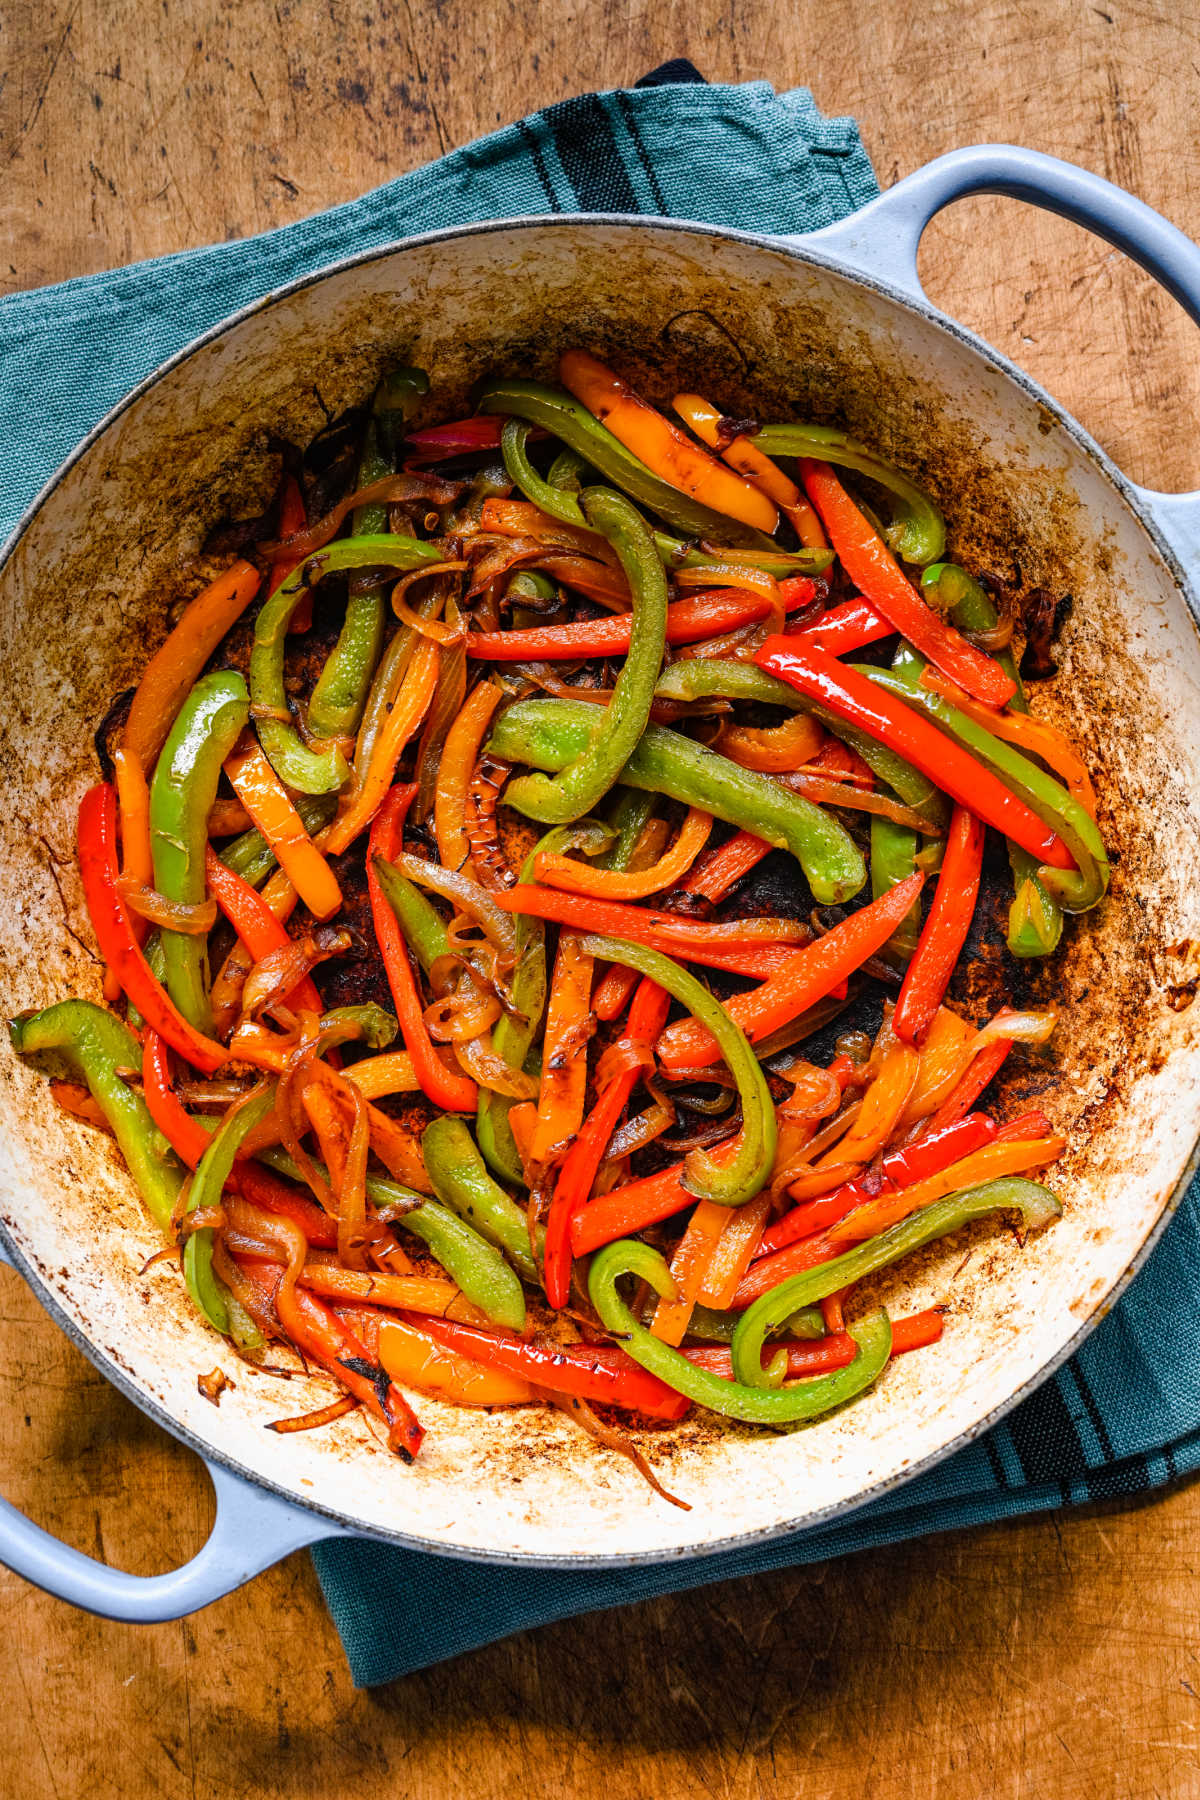 Cooked strips of onion and bell pepper in a Dutch oven.